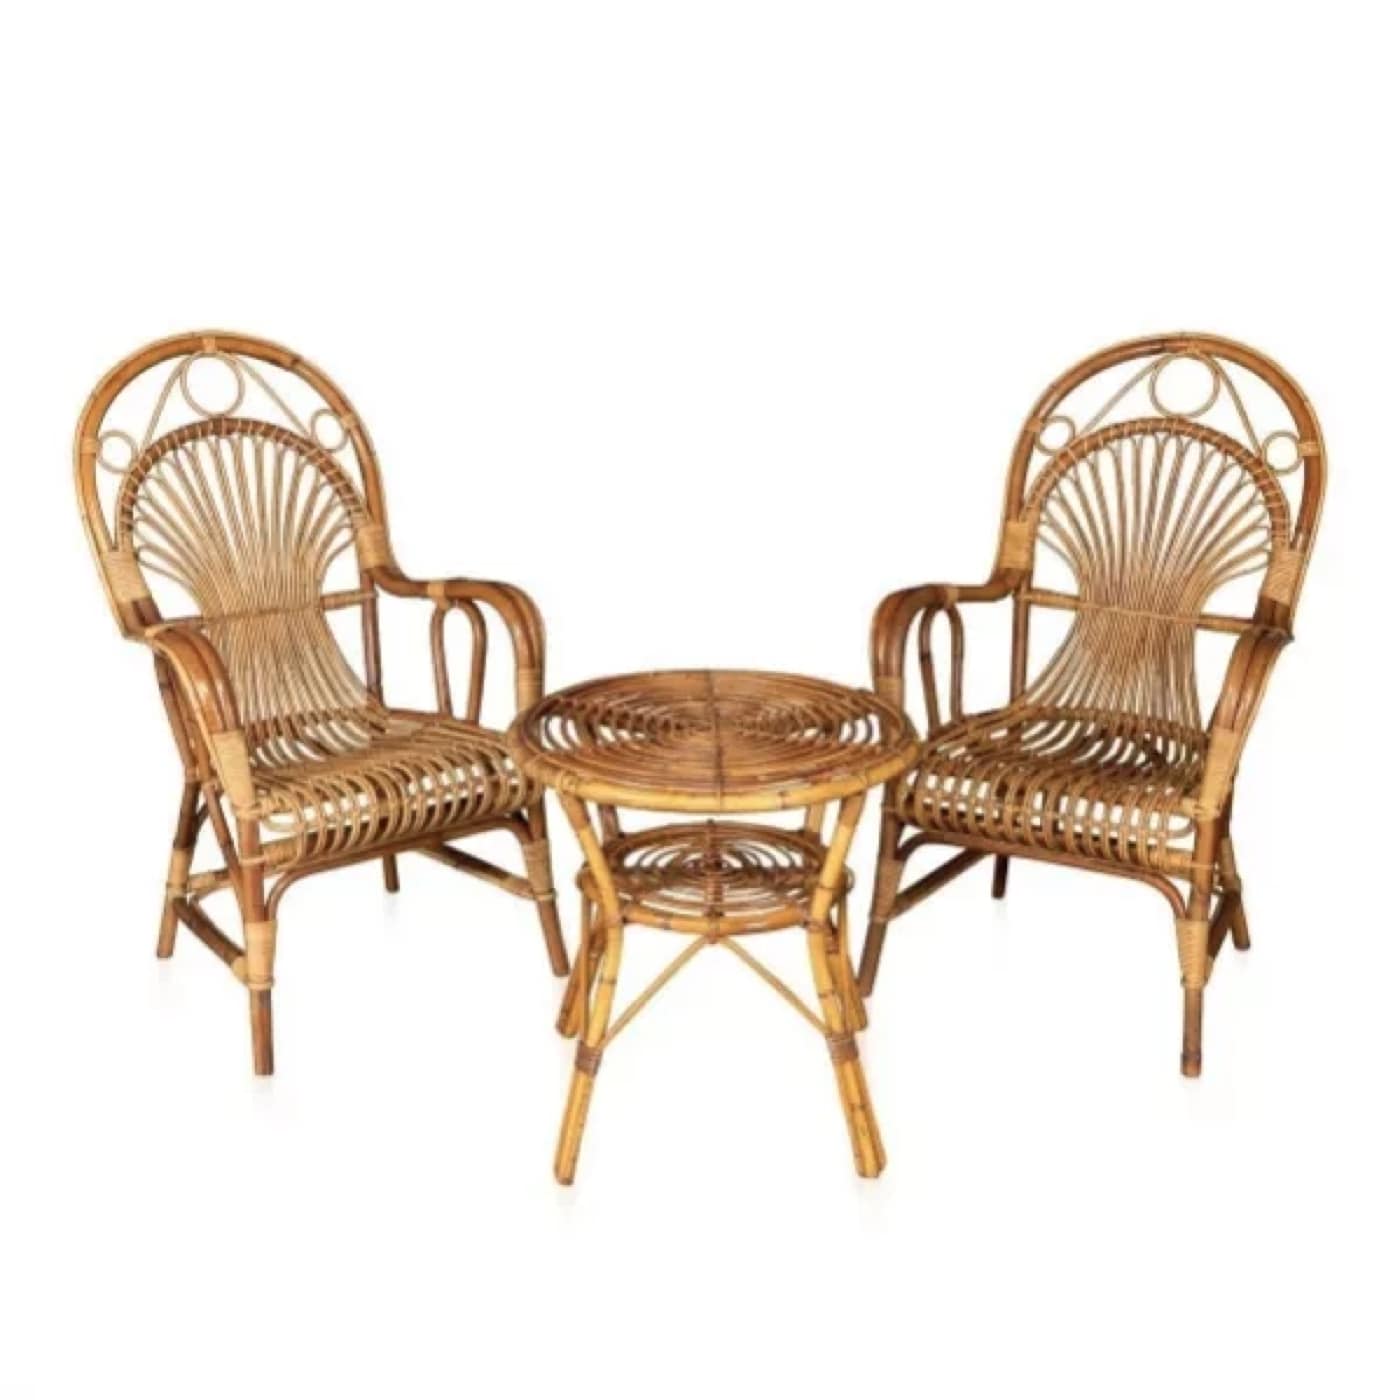 Stylish-Italian-set-of-wicker-chairs-and-table-from-the-1970s-